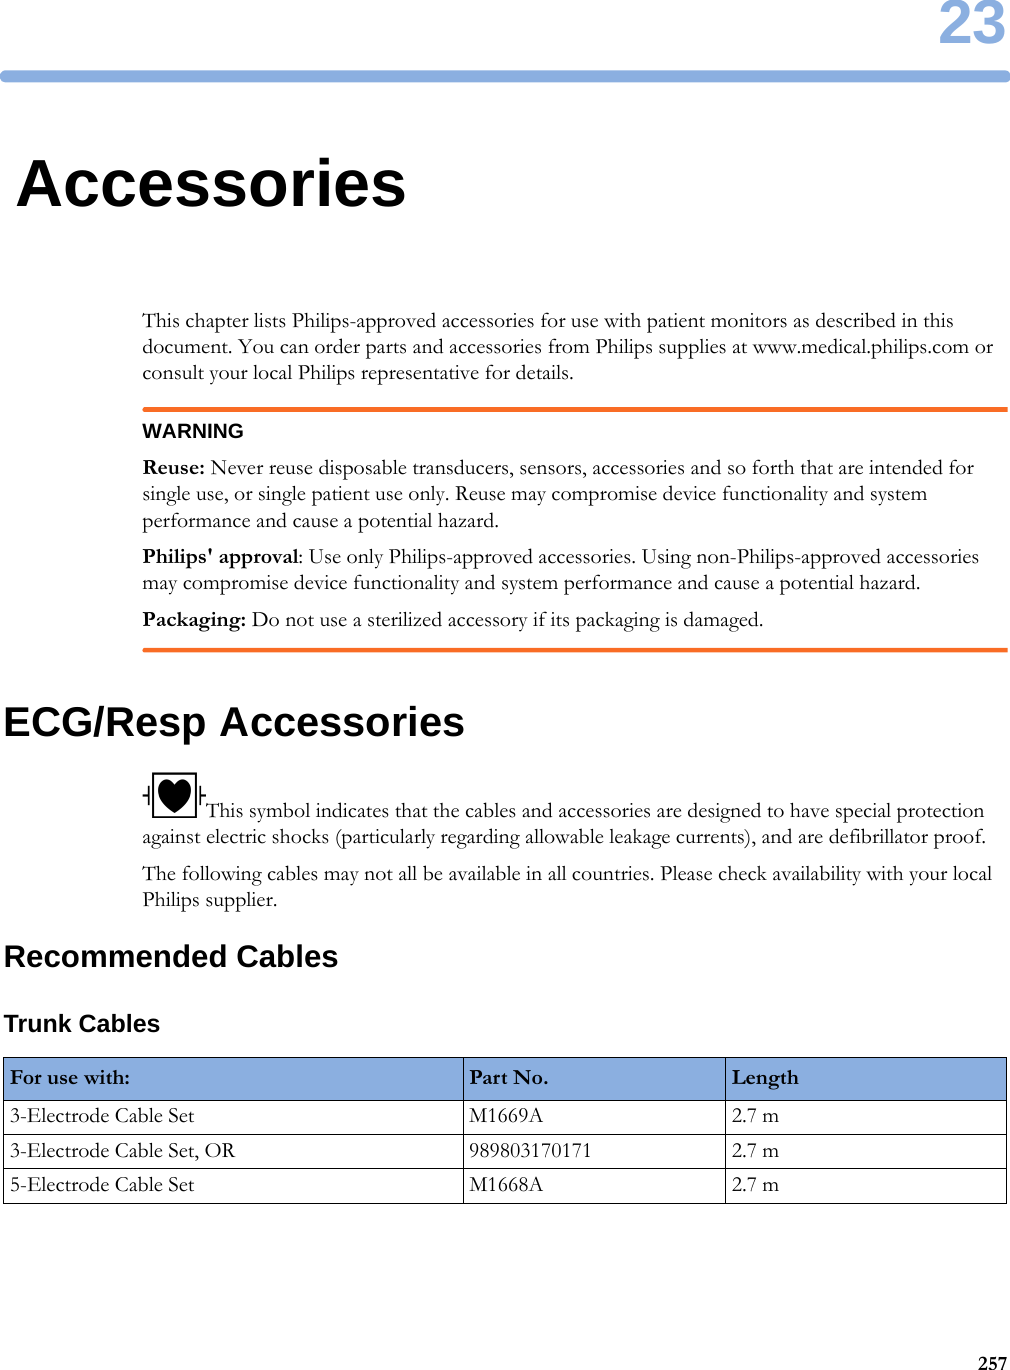 2325723AccessoriesThis chapter lists Philips-approved accessories for use with patient monitors as described in this document. You can order parts and accessories from Philips supplies at www.medical.philips.com or consult your local Philips representative for details.WARNINGReuse: Never reuse disposable transducers, sensors, accessories and so forth that are intended for single use, or single patient use only. Reuse may compromise device functionality and system performance and cause a potential hazard.Philips&apos; approval: Use only Philips-approved accessories. Using non-Philips-approved accessories may compromise device functionality and system performance and cause a potential hazard.Packaging: Do not use a sterilized accessory if its packaging is damaged.ECG/Resp AccessoriesThis symbol indicates that the cables and accessories are designed to have special protection against electric shocks (particularly regarding allowable leakage currents), and are defibrillator proof.The following cables may not all be available in all countries. Please check availability with your local Philips supplier.Recommended CablesTrunk CablesFor use with: Part No. Length3-Electrode Cable Set M1669A 2.7 m3-Electrode Cable Set, OR 989803170171 2.7 m5-Electrode Cable Set M1668A 2.7 m